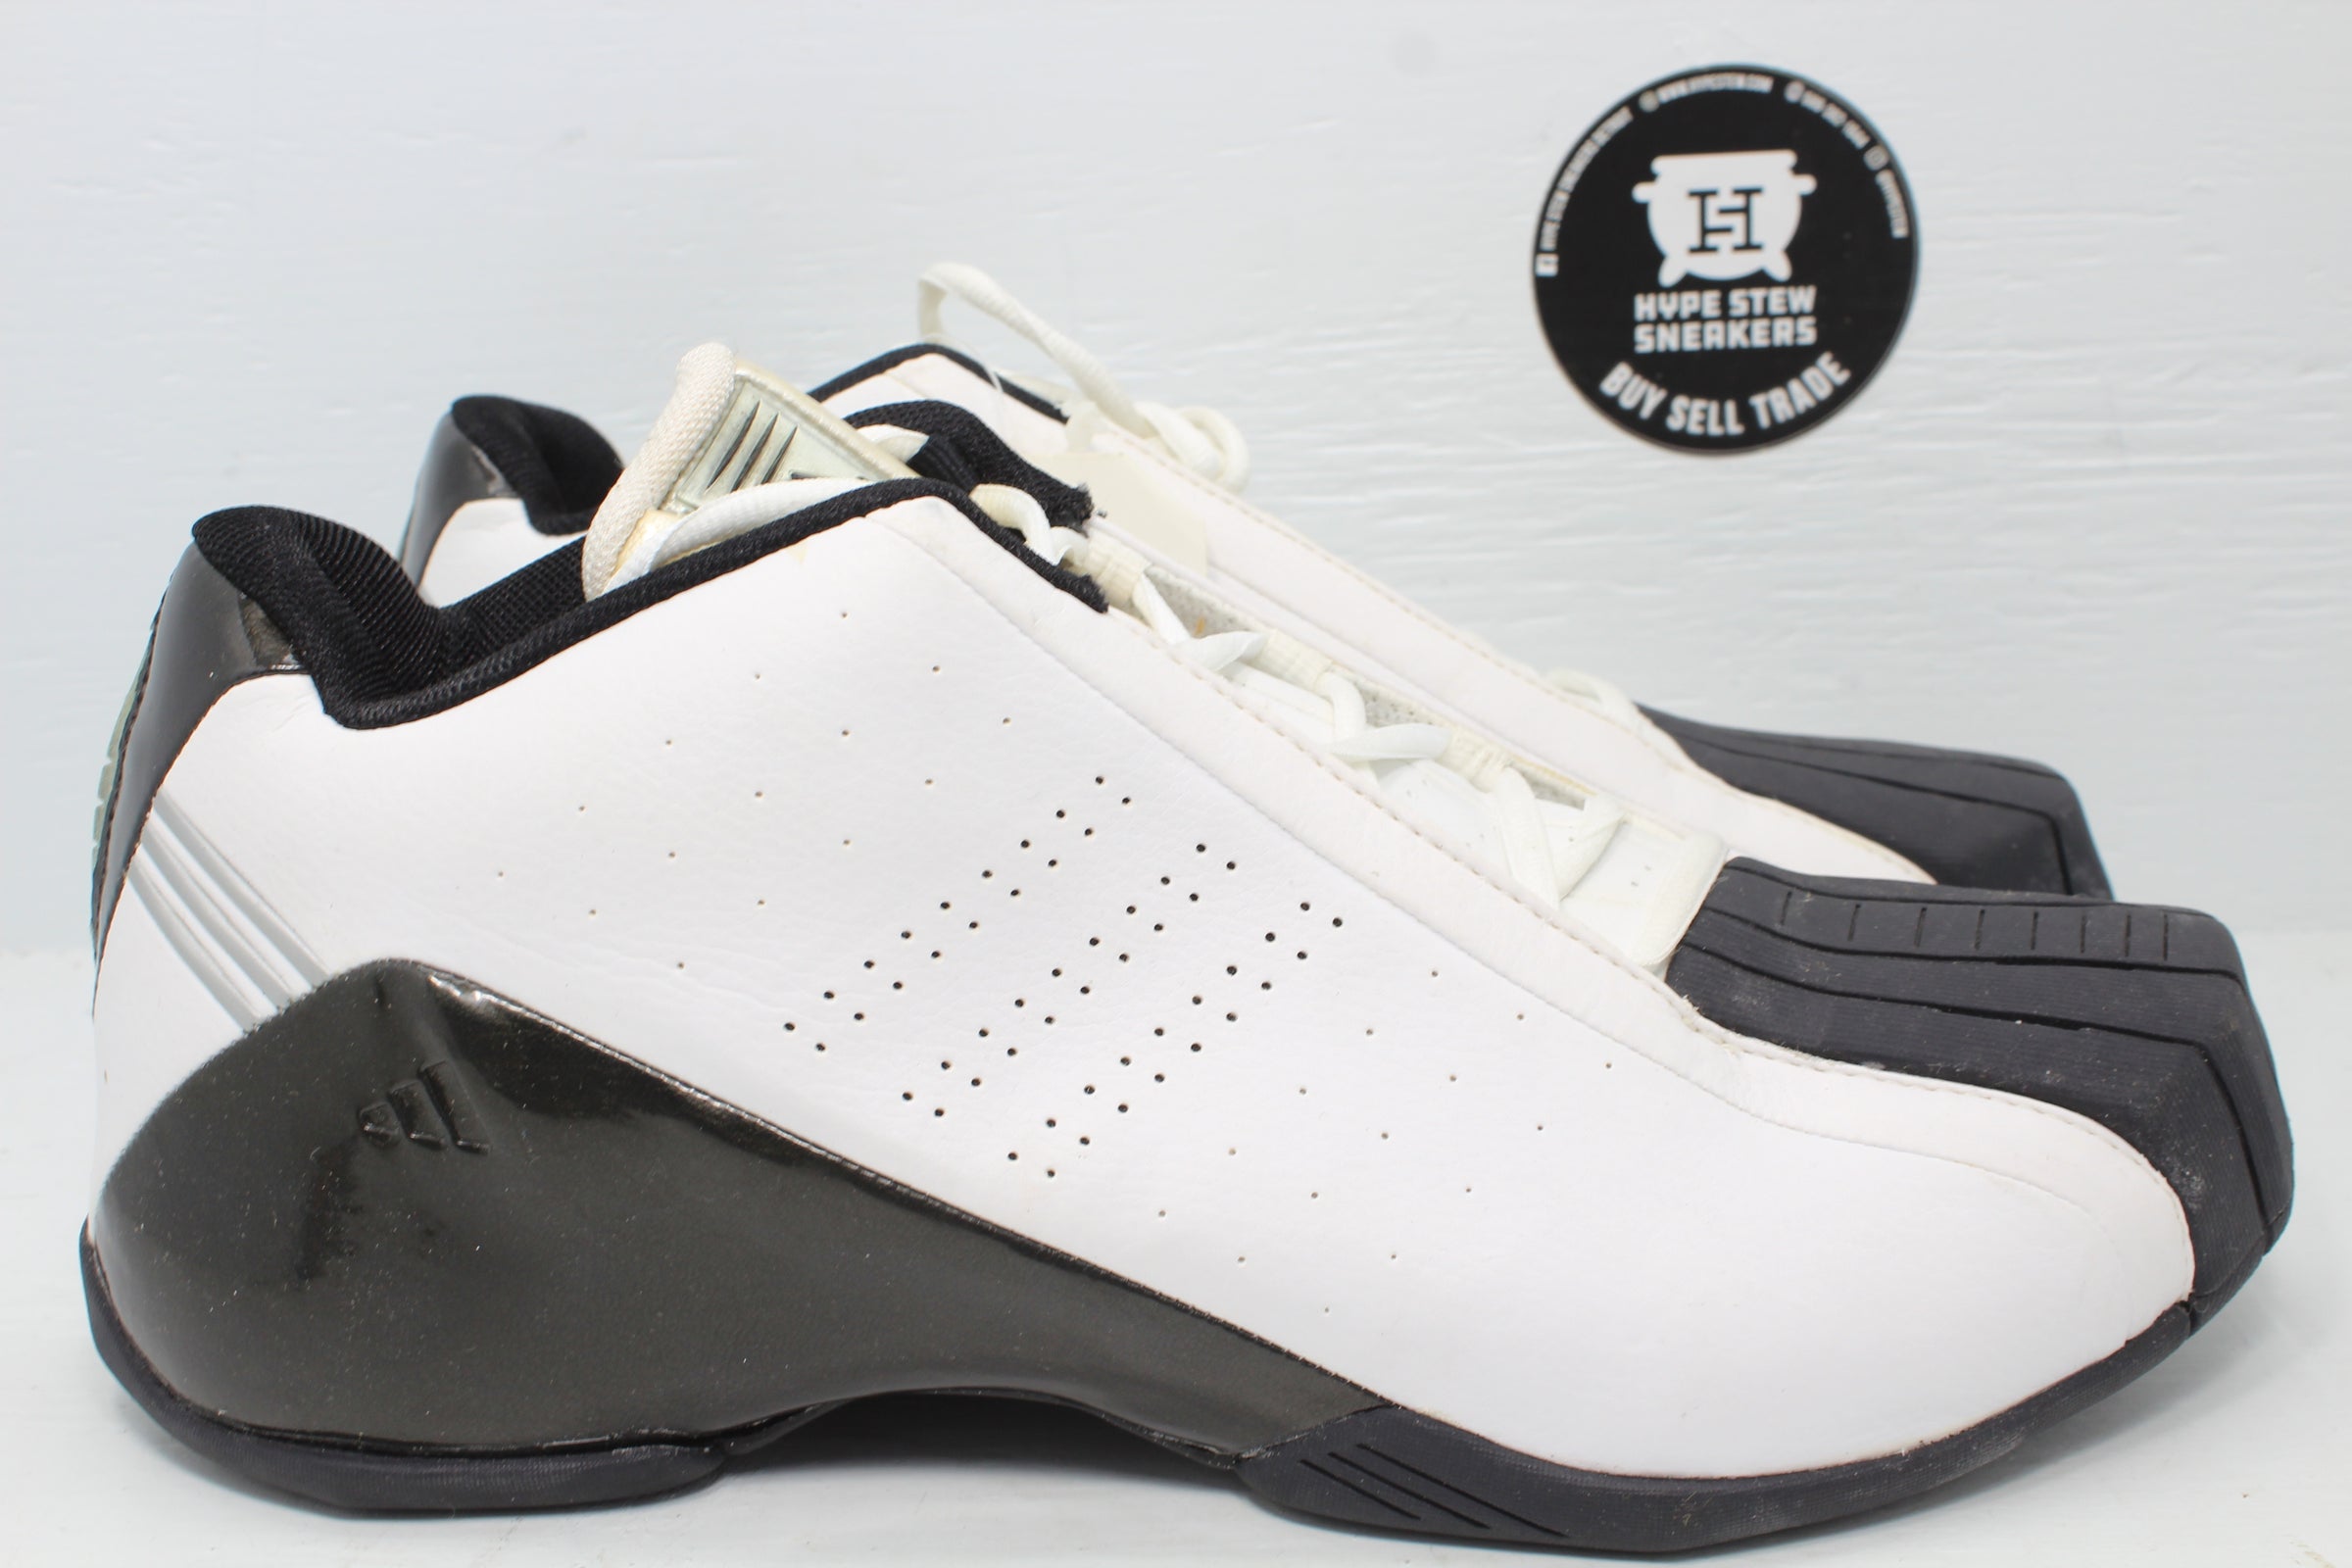 Adidas Players Ball Tim Duncan (2003) Hype Stew Sneakers